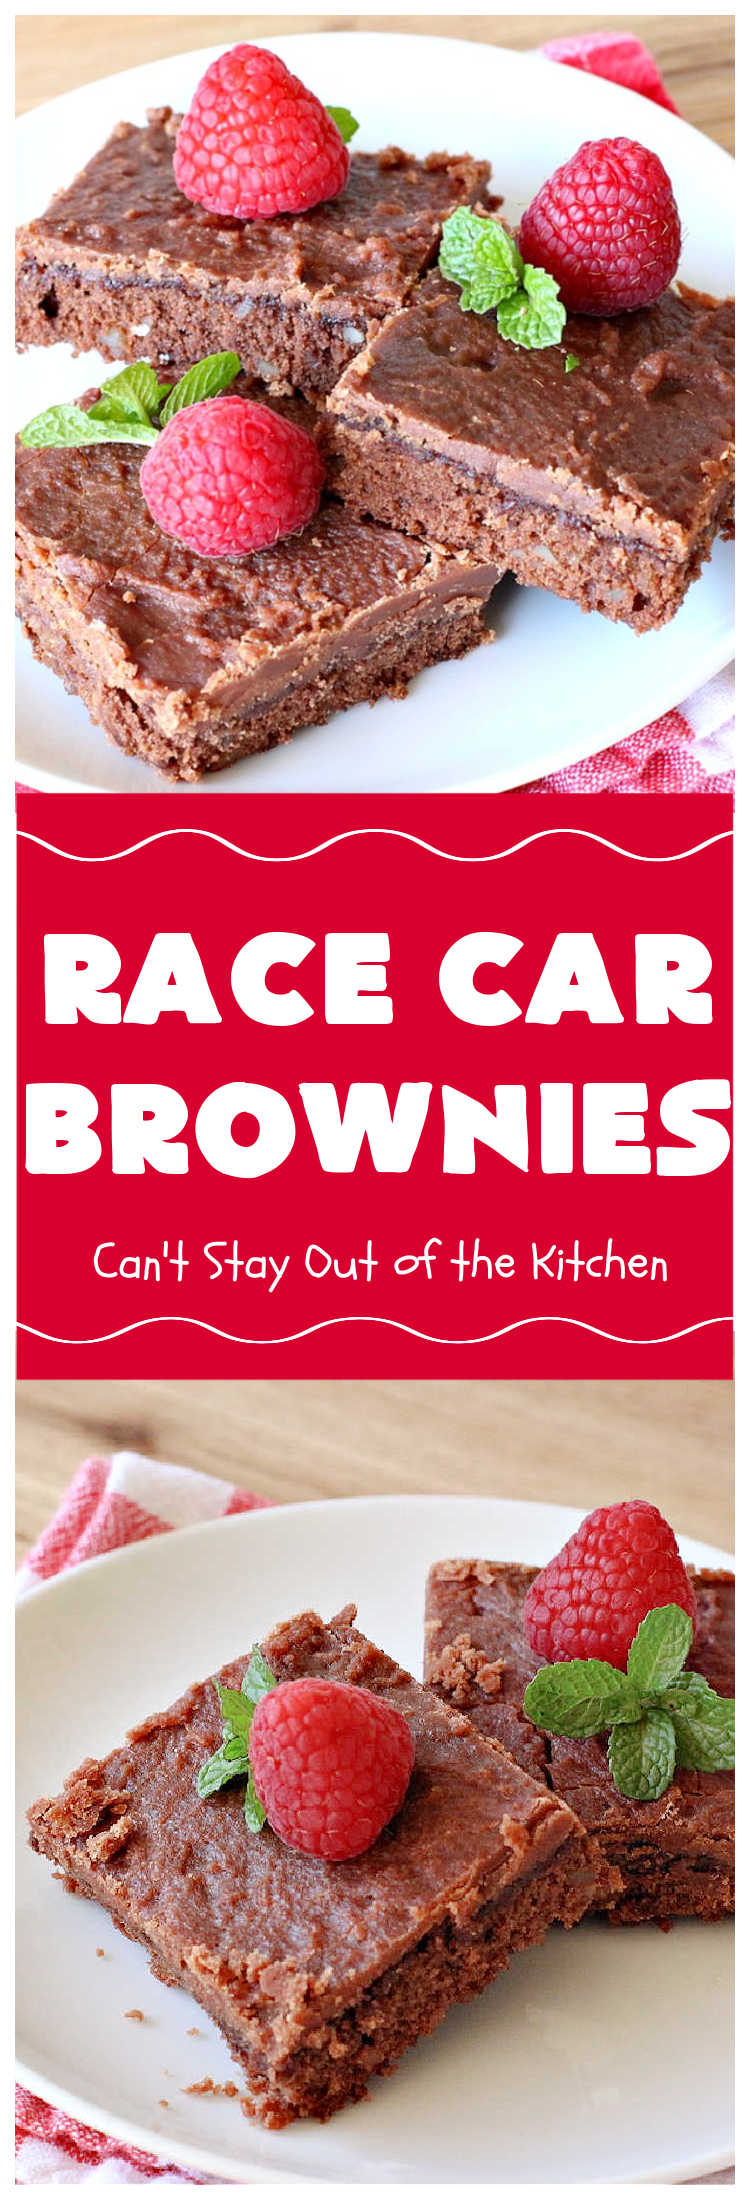 Race Car Brownies | Can't Stay out of the Kitchen | these rich, decadent #brownies are perfect for #NASCAR races, potlucks, soccer games, #tailgating or backyard barbecues. They have a rich, fudgy icing on top & they're made with #Hersheys #chocolate syrup. So delicious. #ChocolateDessert #NASCARDessert #dessert #Easter #EasterDessert #RaceCarBrownies